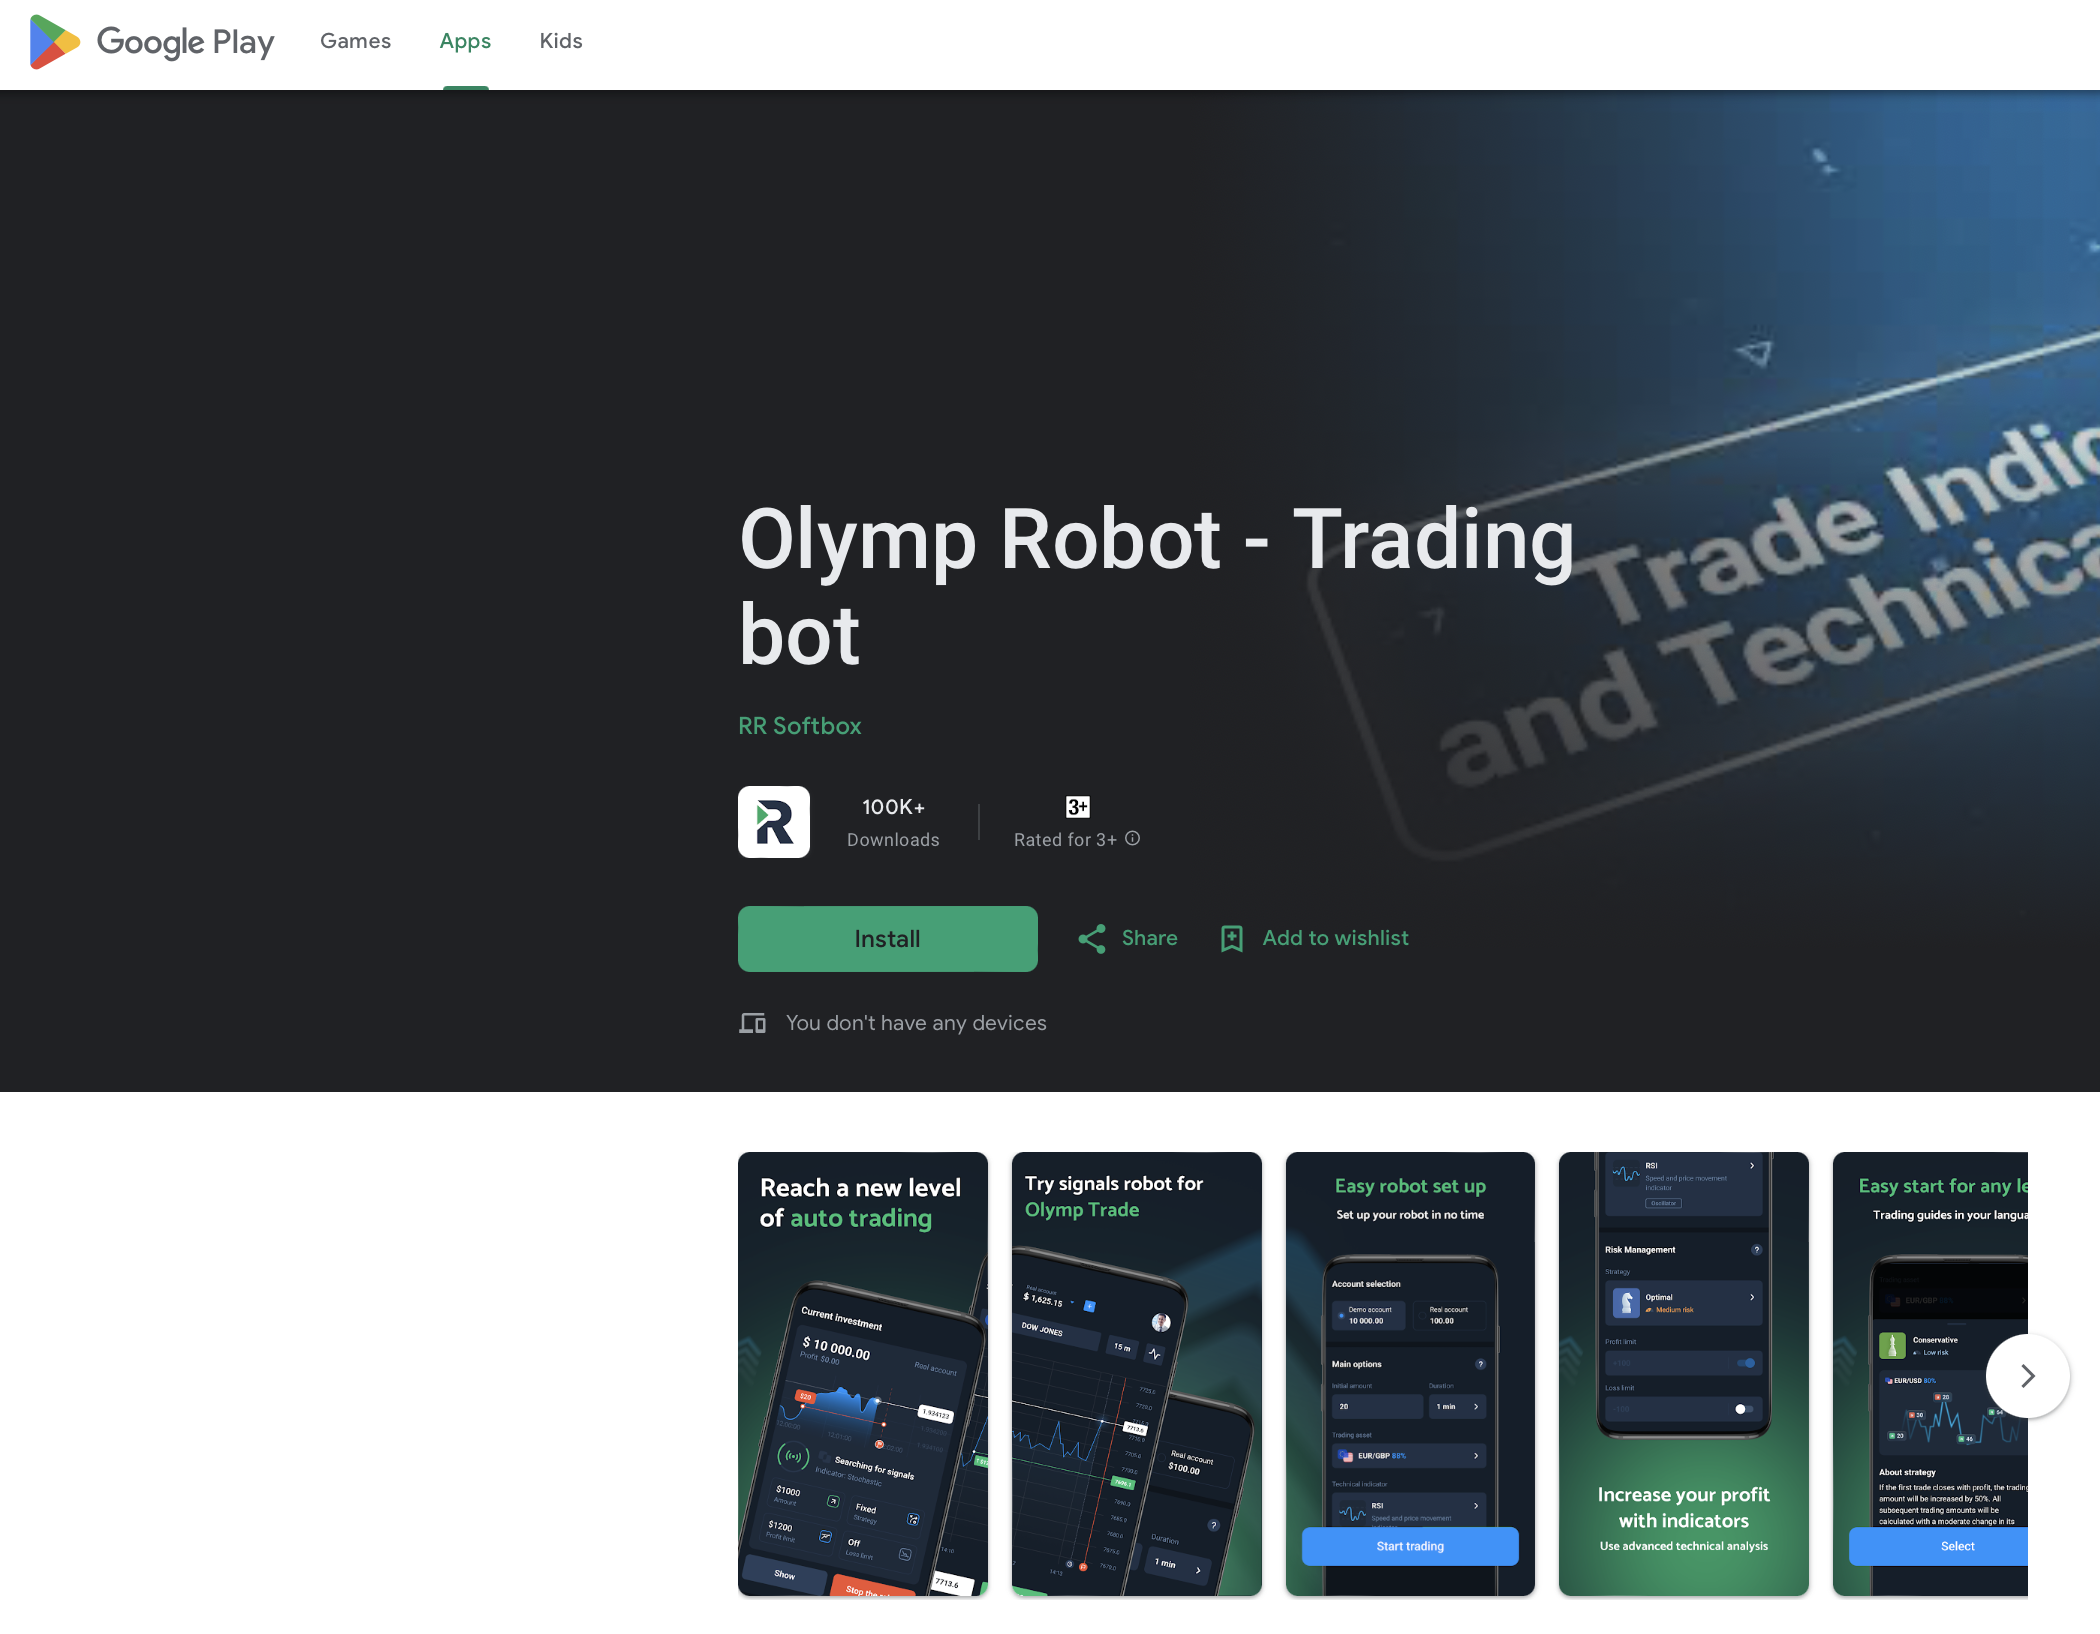 Olymp Robot - Trading bot in the Google Play Store